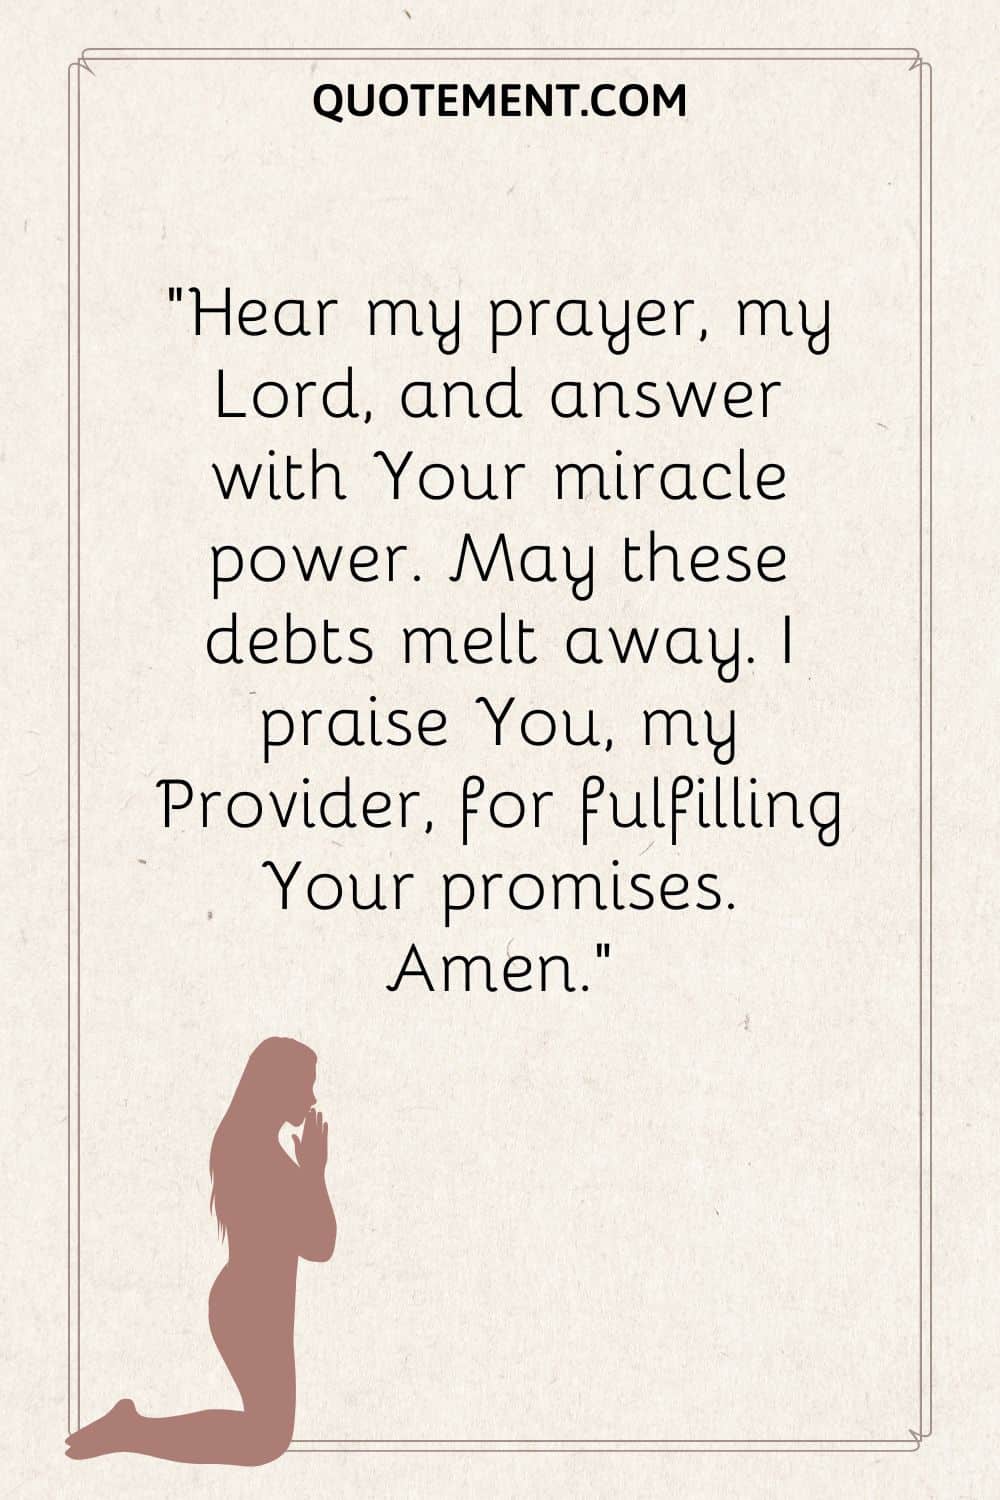 Hear my prayer, my Lord, and answer with Your miracle power